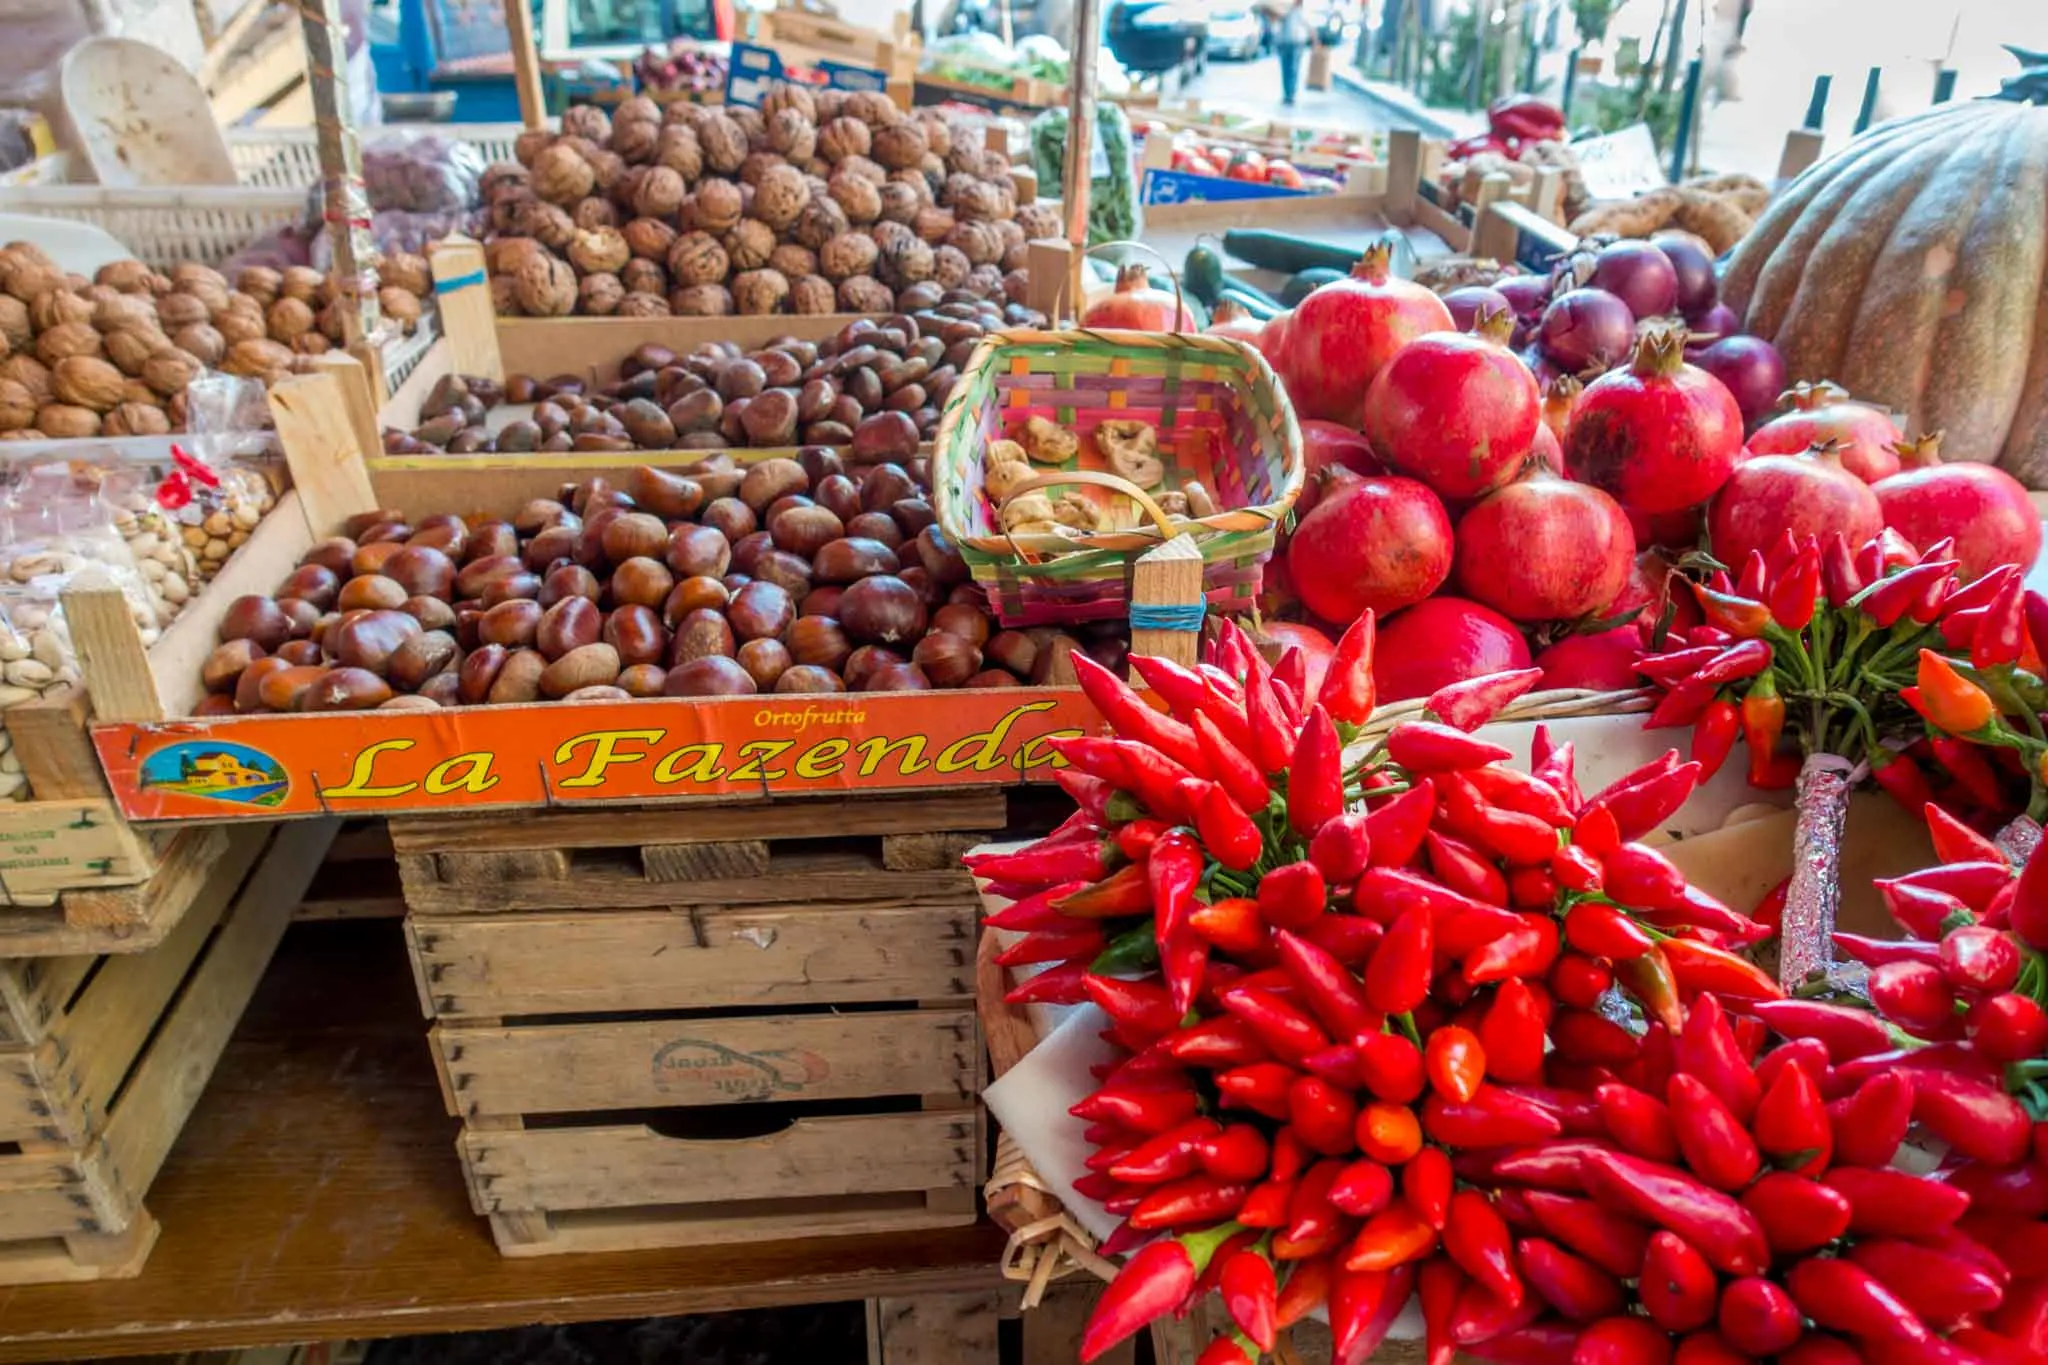 Fruit, vegetables, and nuts on display at a market